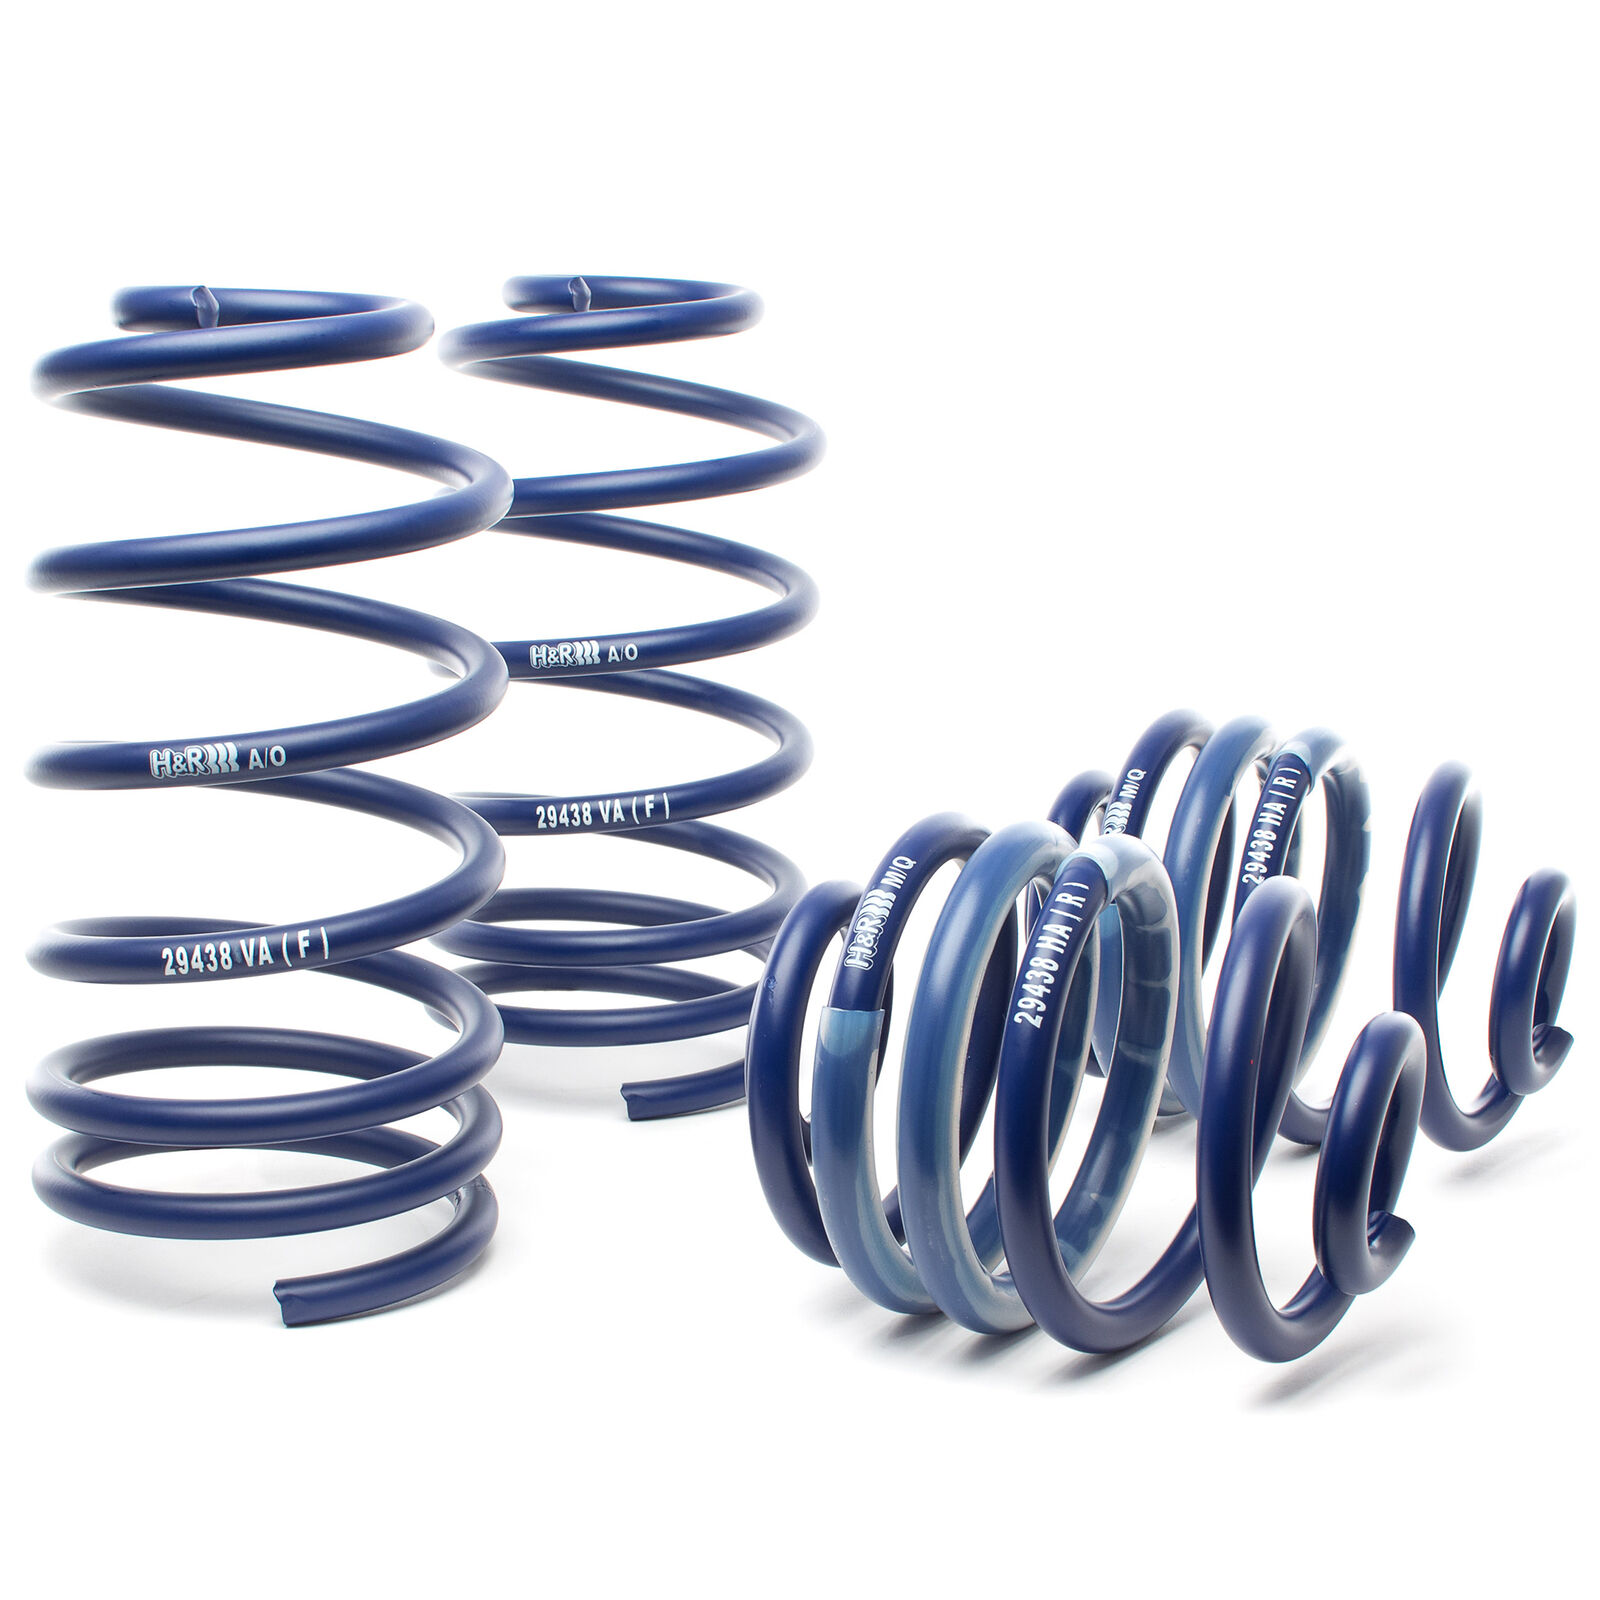 H&R 50312-2 Lowering Sport Front and Rear Springs Kit for 99-06 Audi TT Quattro